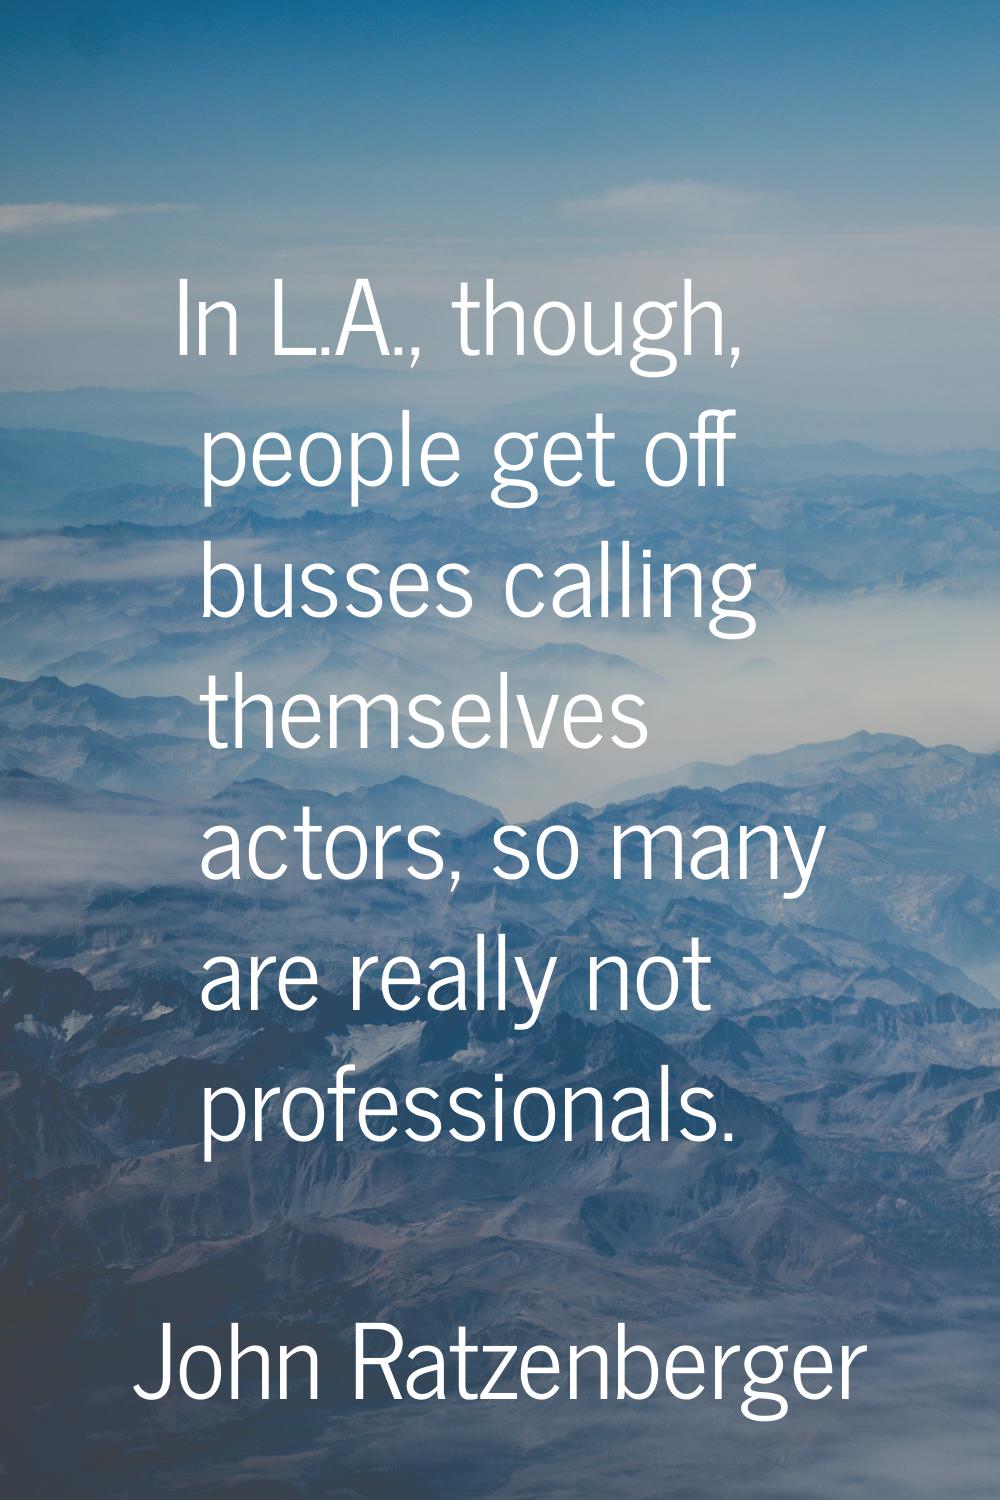 In L.A., though, people get off busses calling themselves actors, so many are really not profession